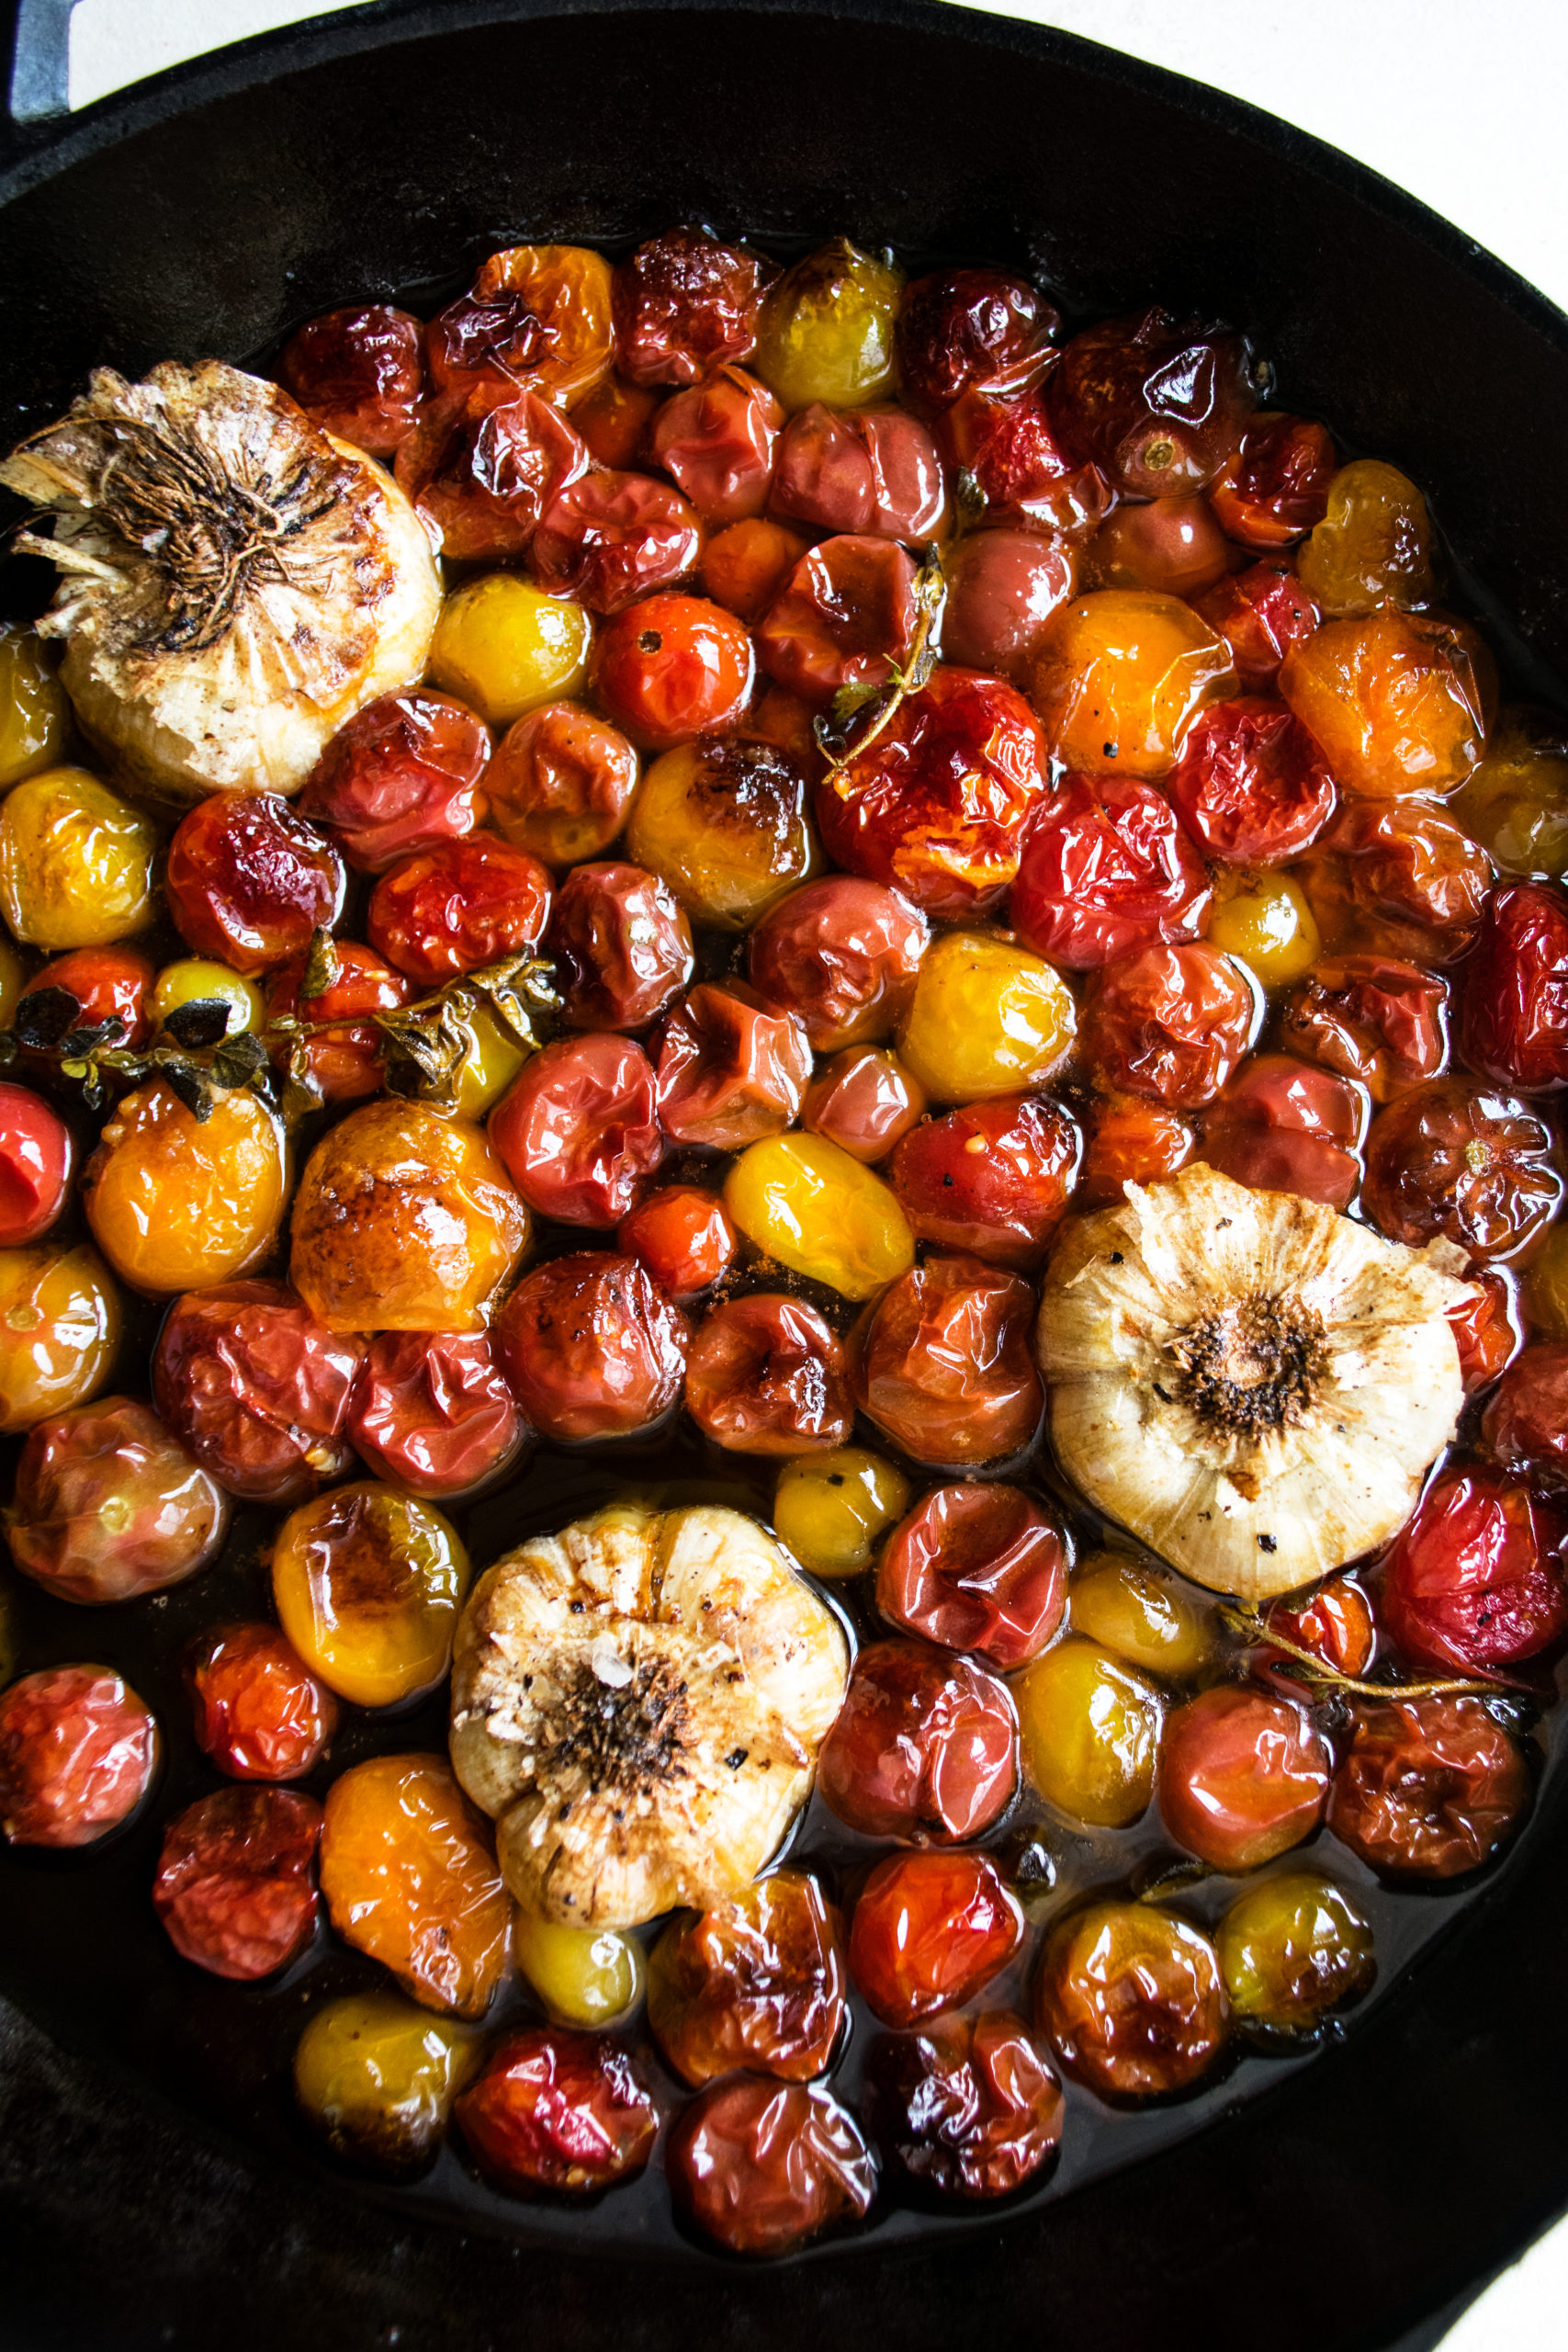 How To Roast Cherry Tomatoes with Garlic & Herbs - The Original Dish